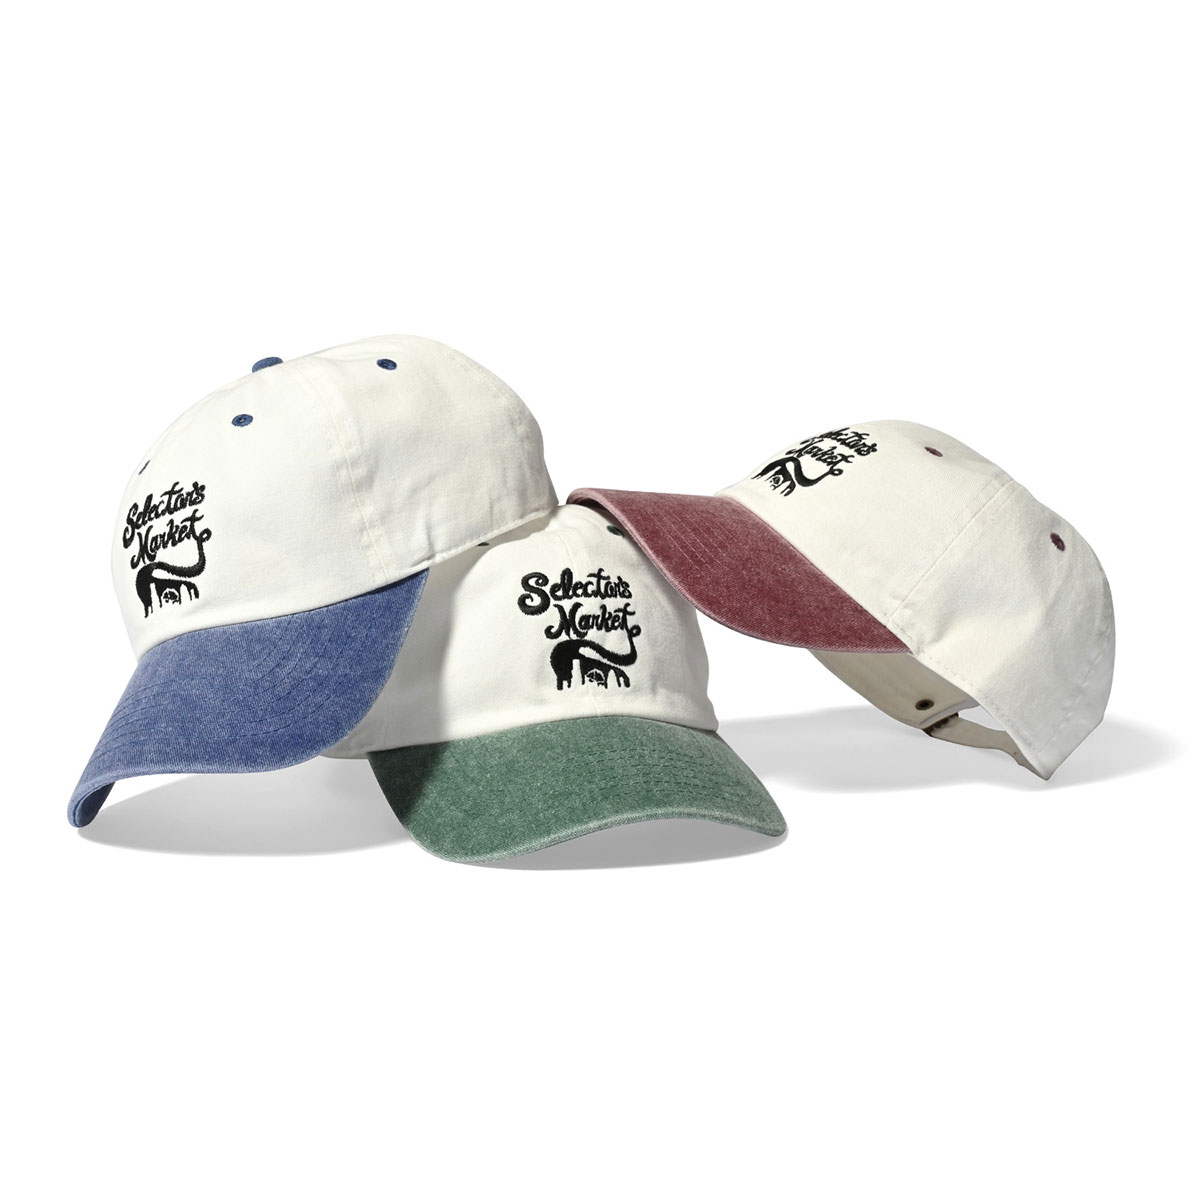 LFYT エルエフワイティー SELECTOR'S MARKET "Dig Out" 2TONE CAP ボールキャップ LE231413 ★★